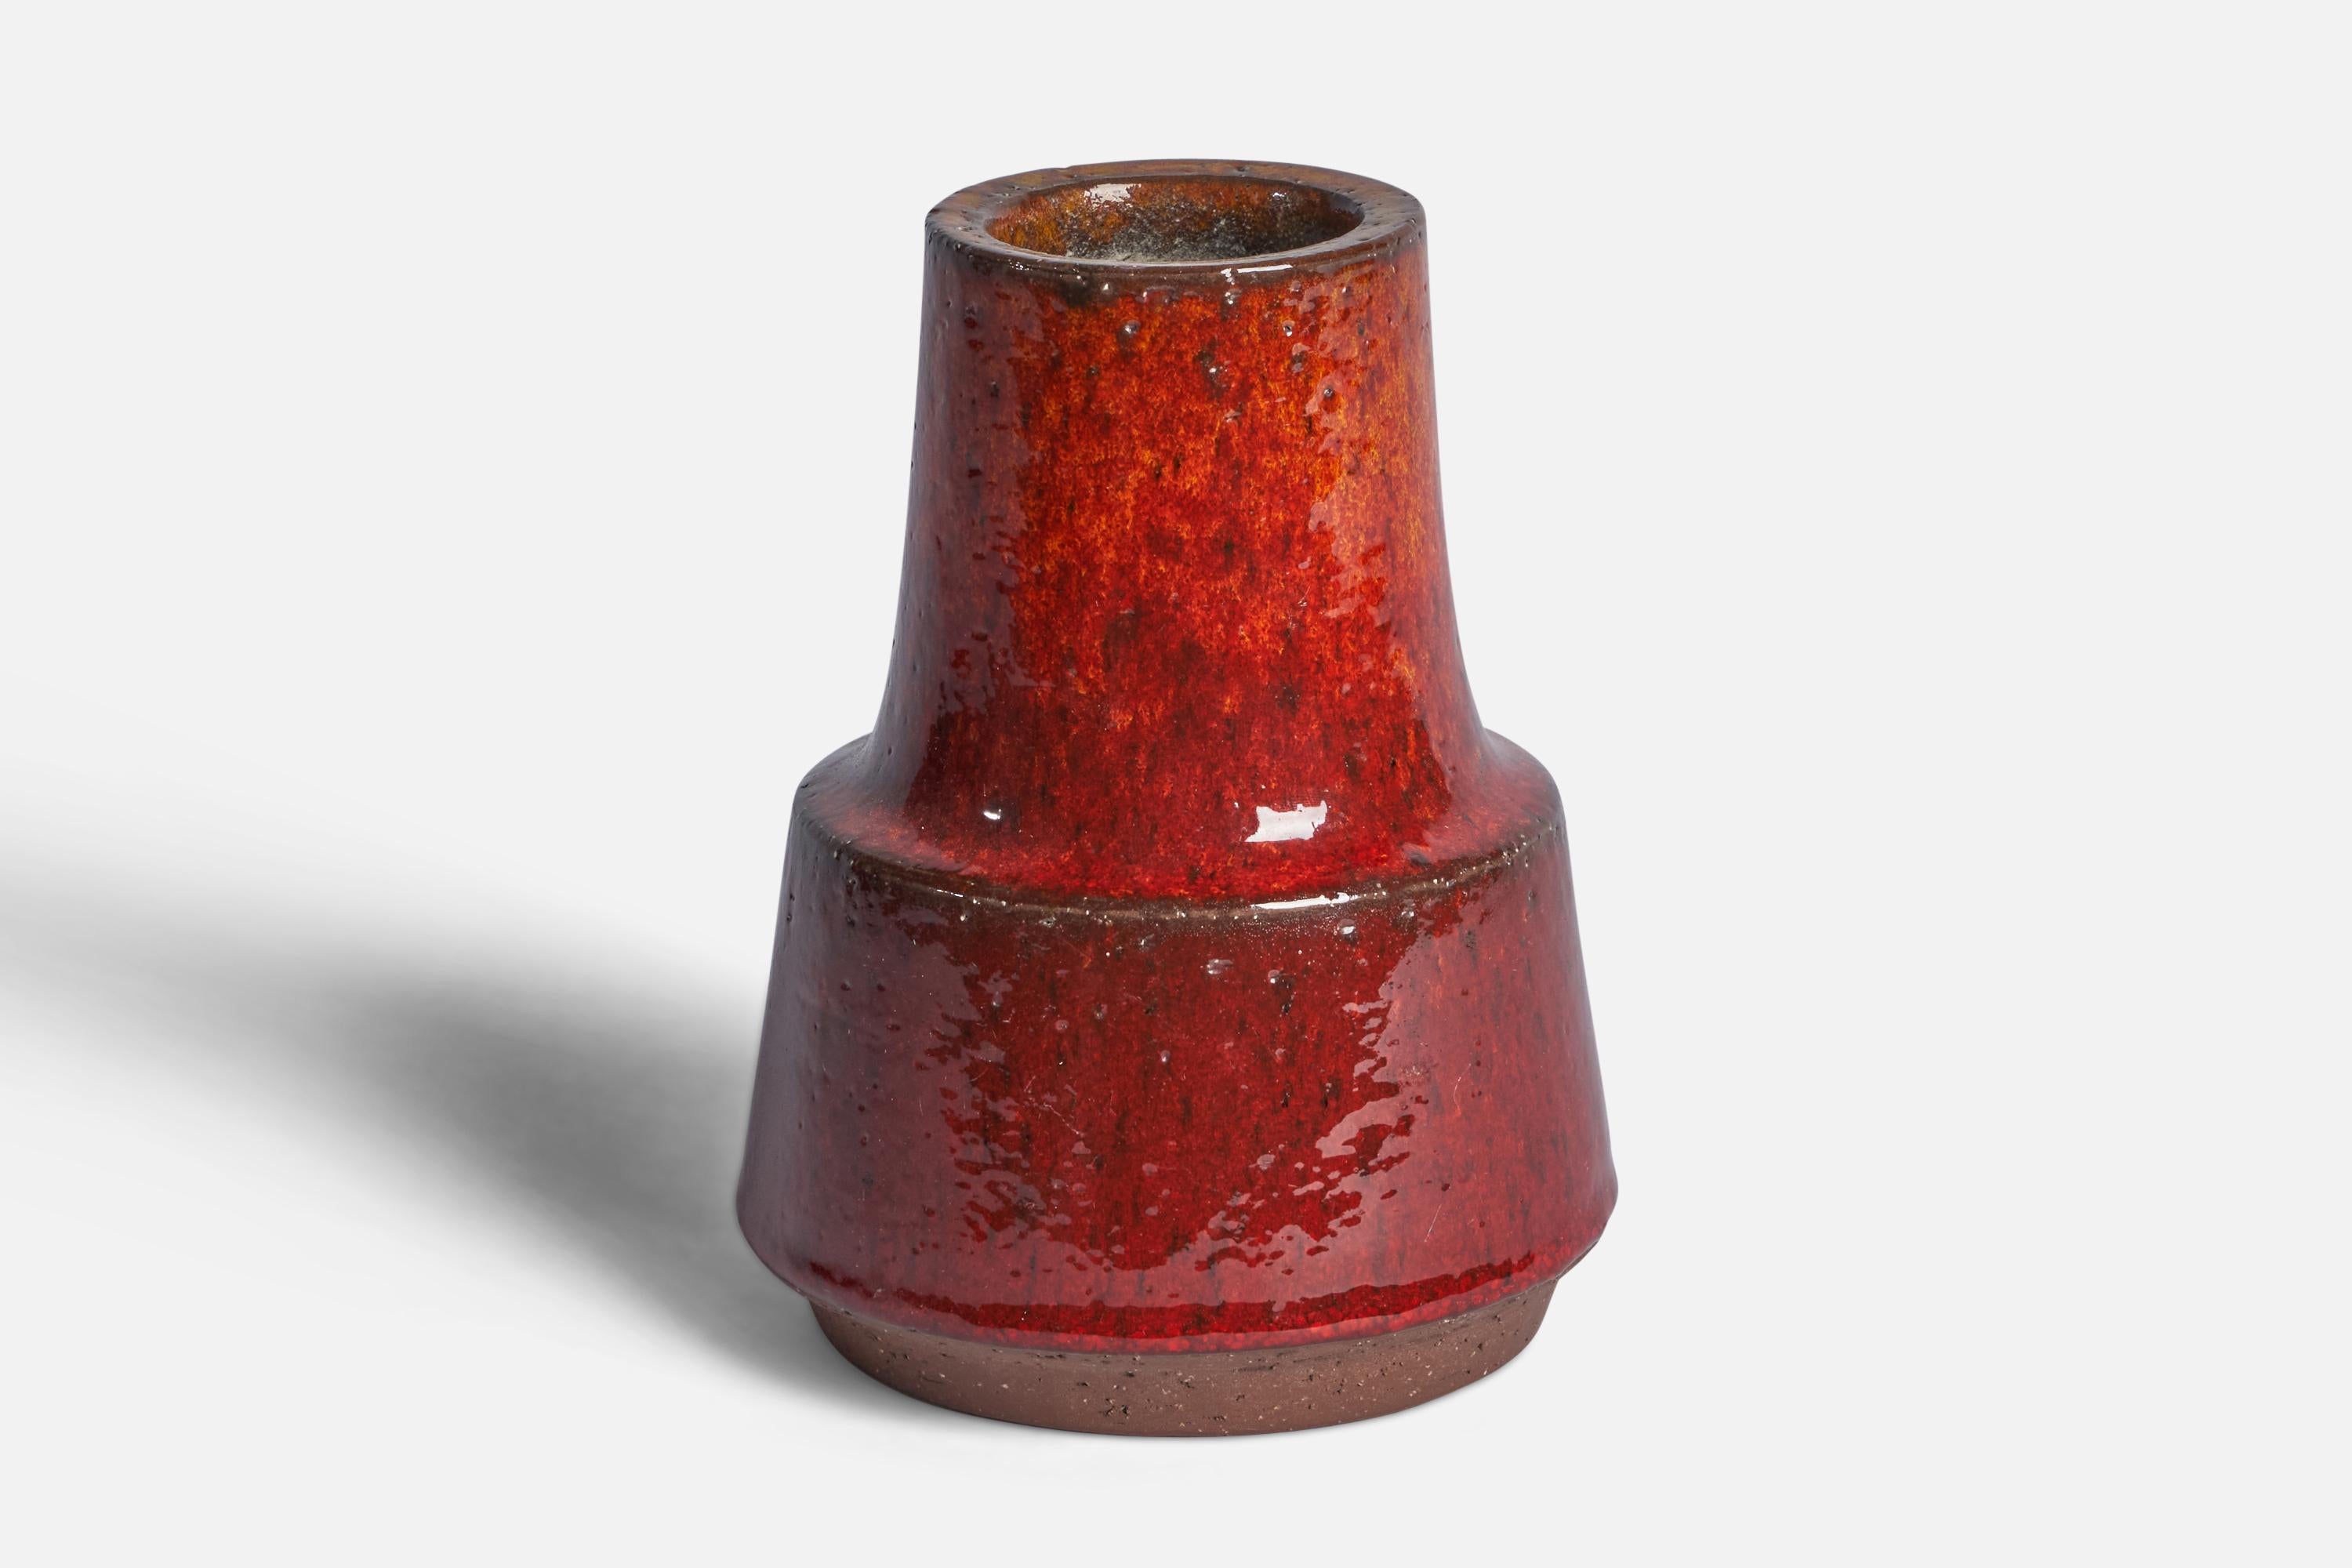 A red semi-glazed stoneware vase designed and produced by Michael Andersen, Bornholm, Sweden, 1960s.